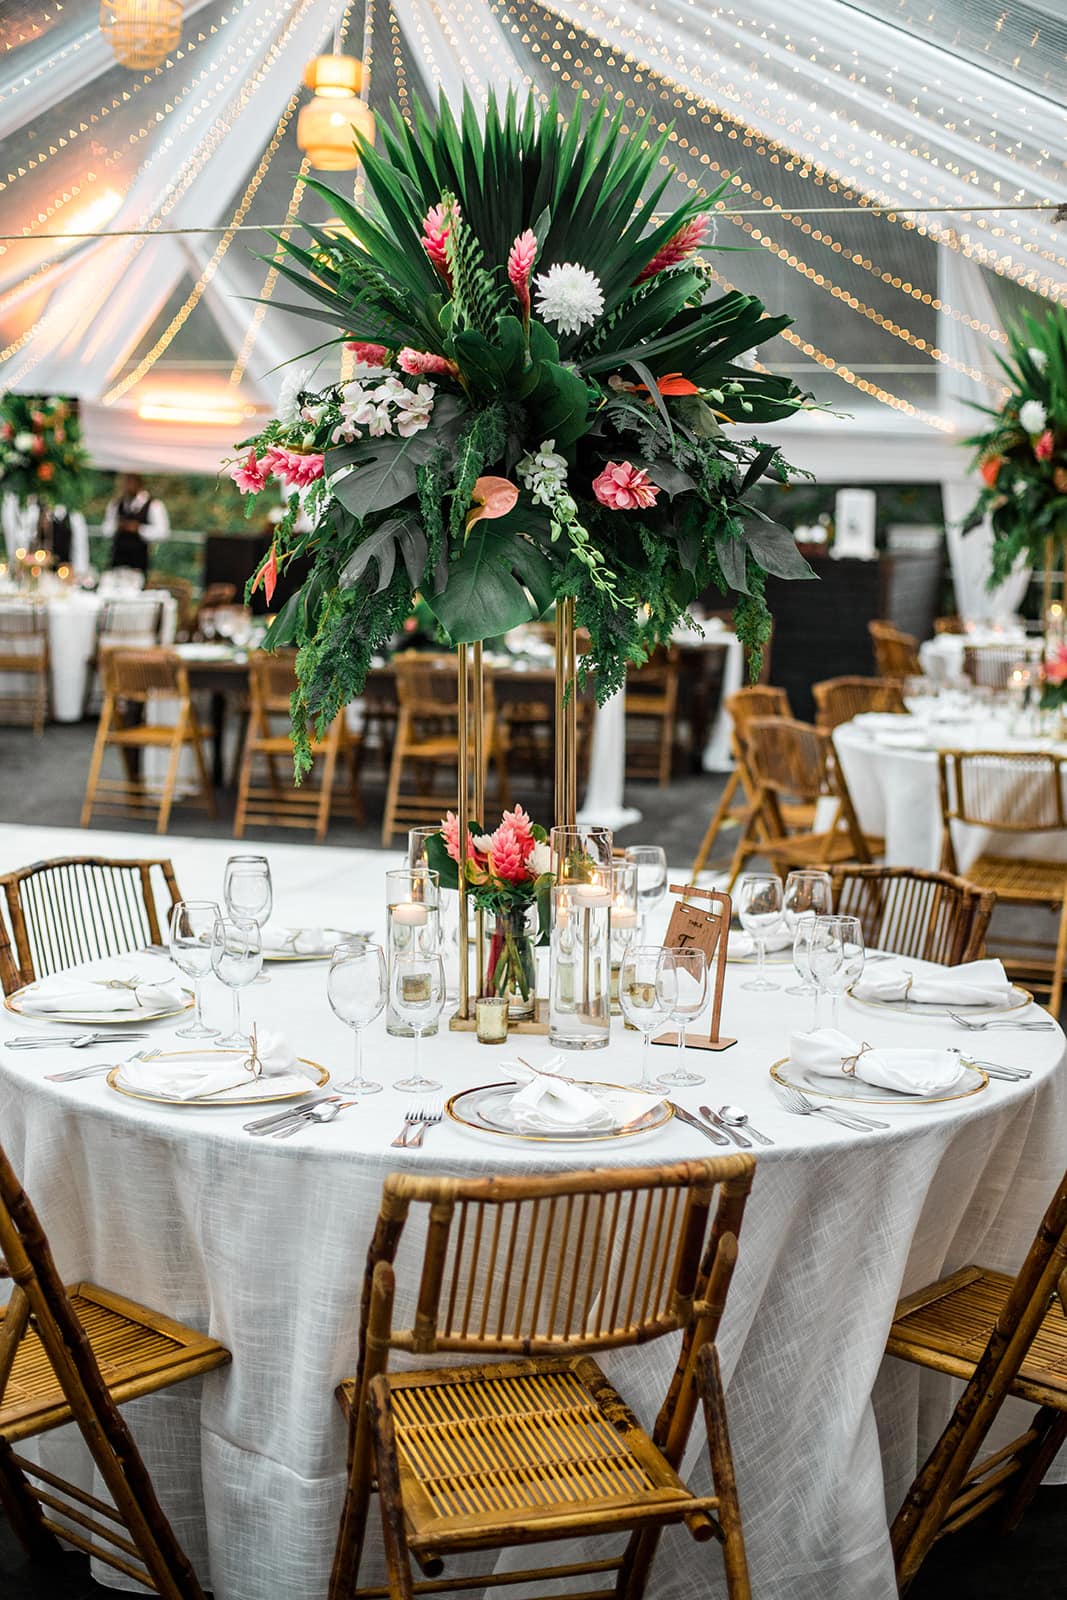 Bohemian wedding decor. There are large monstera leaves and anthuriums statements pieces for each table.